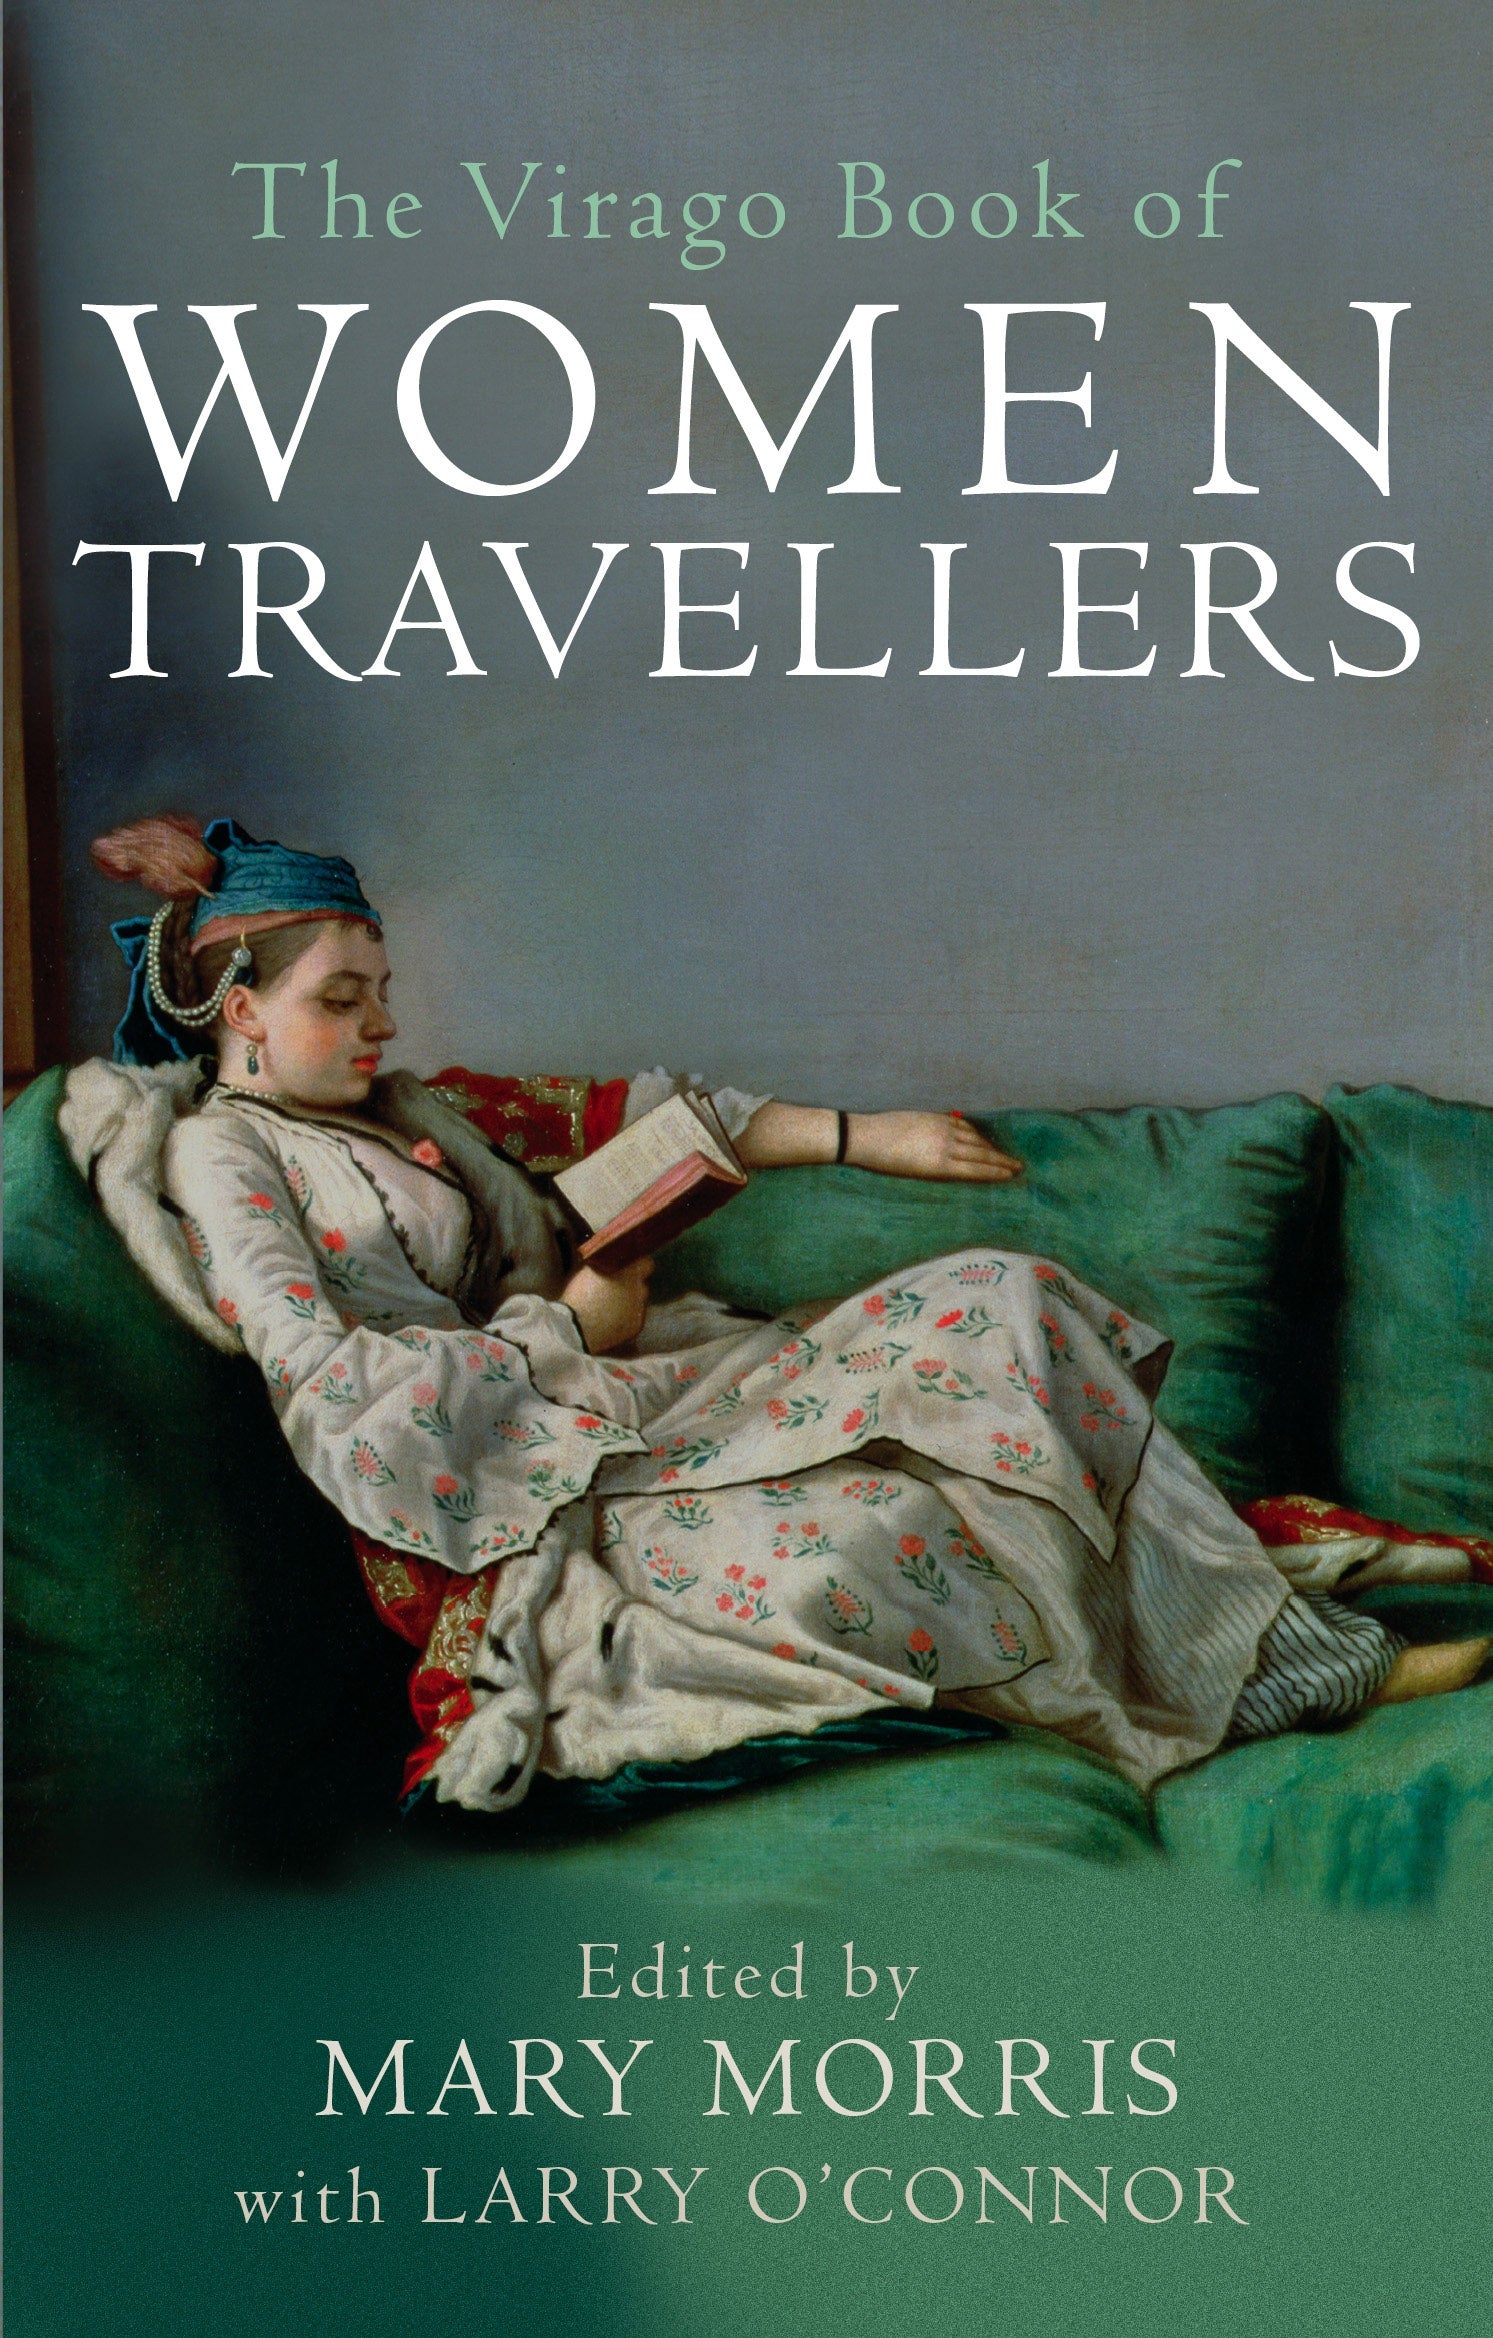 The Virago Book Of Women Travellers. by Mary Morris, Mary Morris, Larry O'Connor